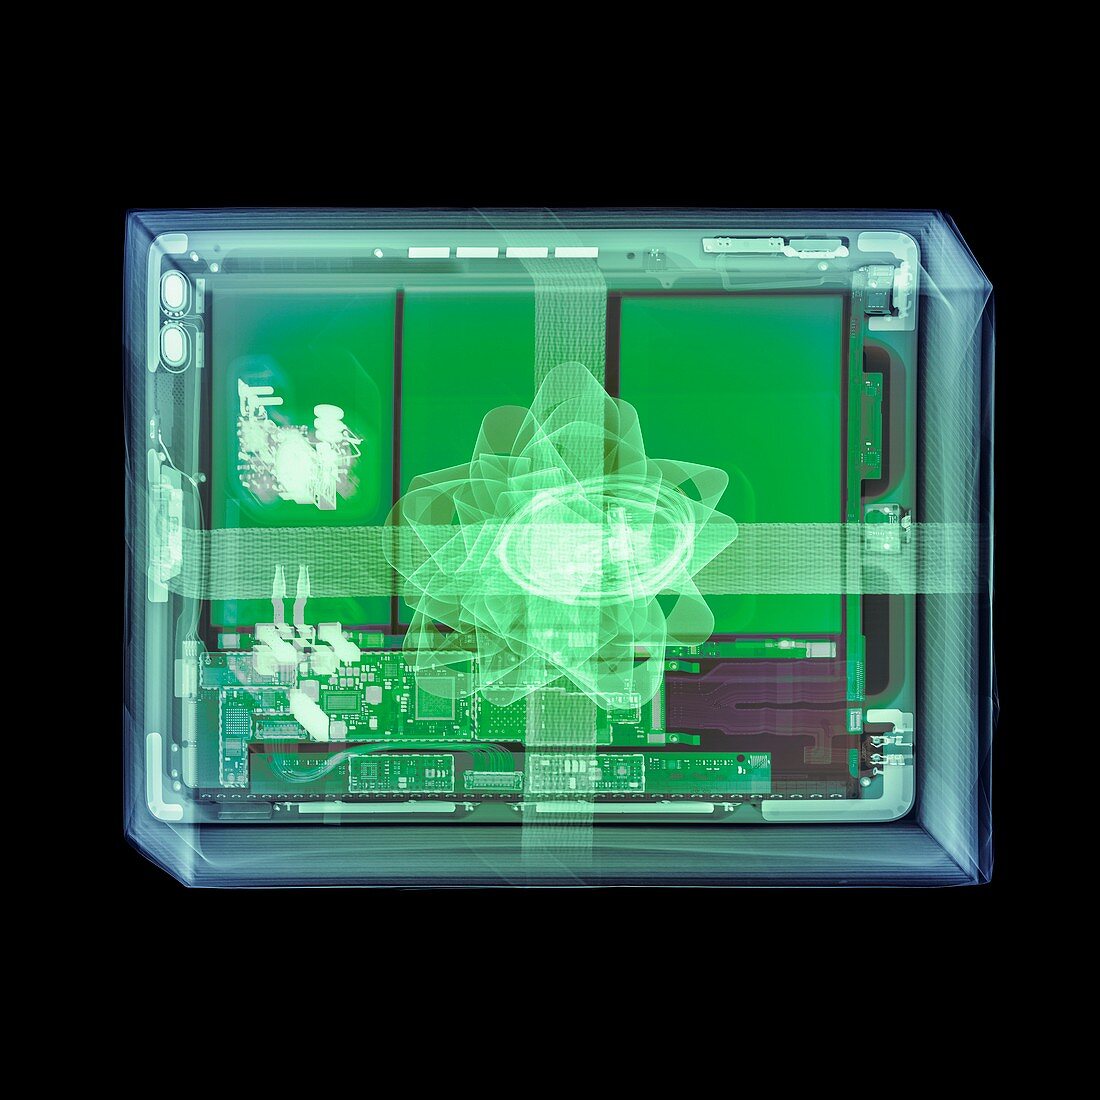 Coloured x-ray of a tablet computer